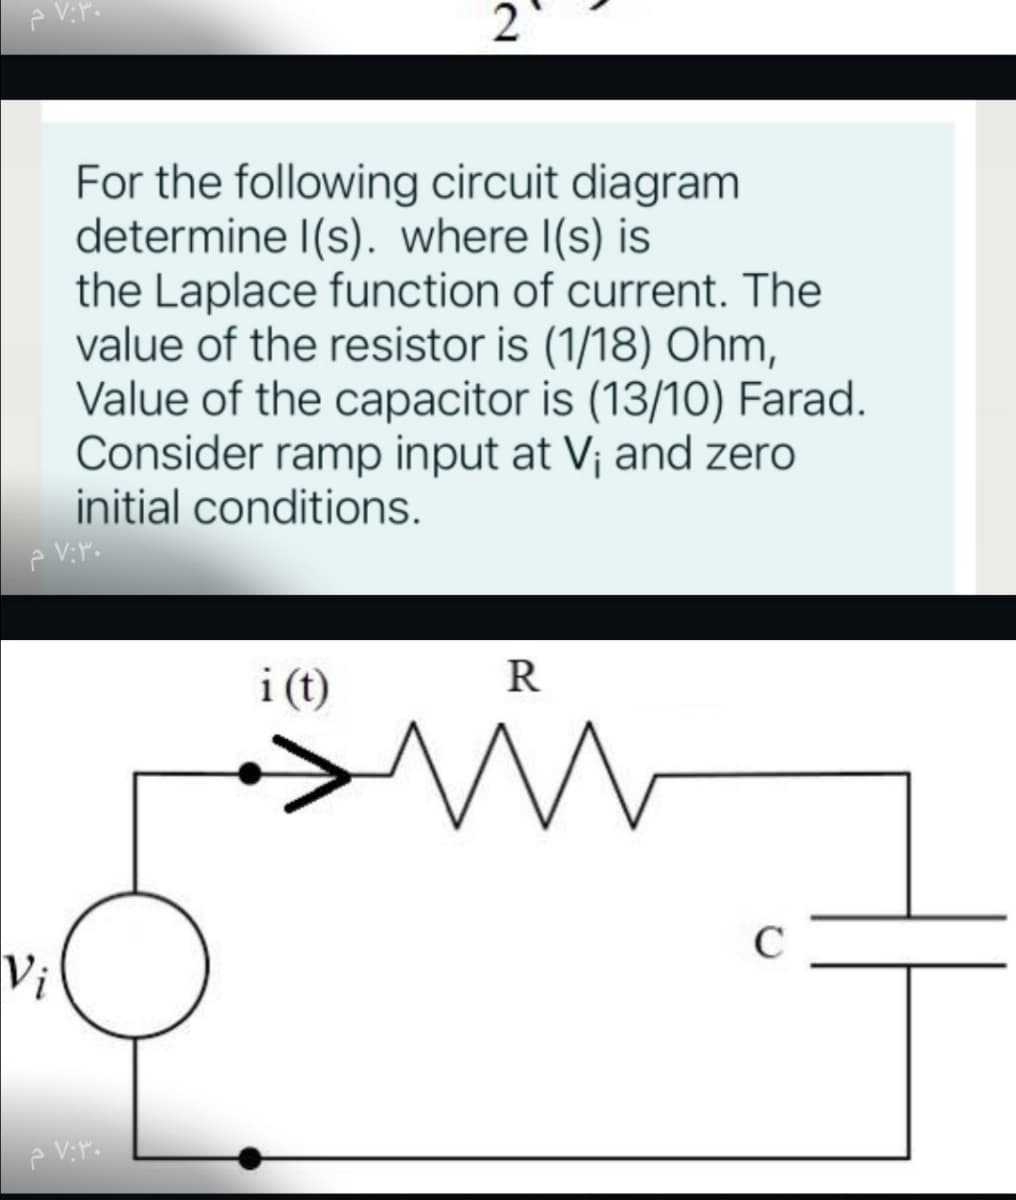 2
For the following circuit diagram
determine I(s). where I(s) is
the Laplace function of current. The
value of the resistor is (1/18) Ohm,
Value of the capacitor is (13/10) Farad.
Consider ramp input at V¡ and zero
initial conditions.
i (t)
C
Vi
R.
